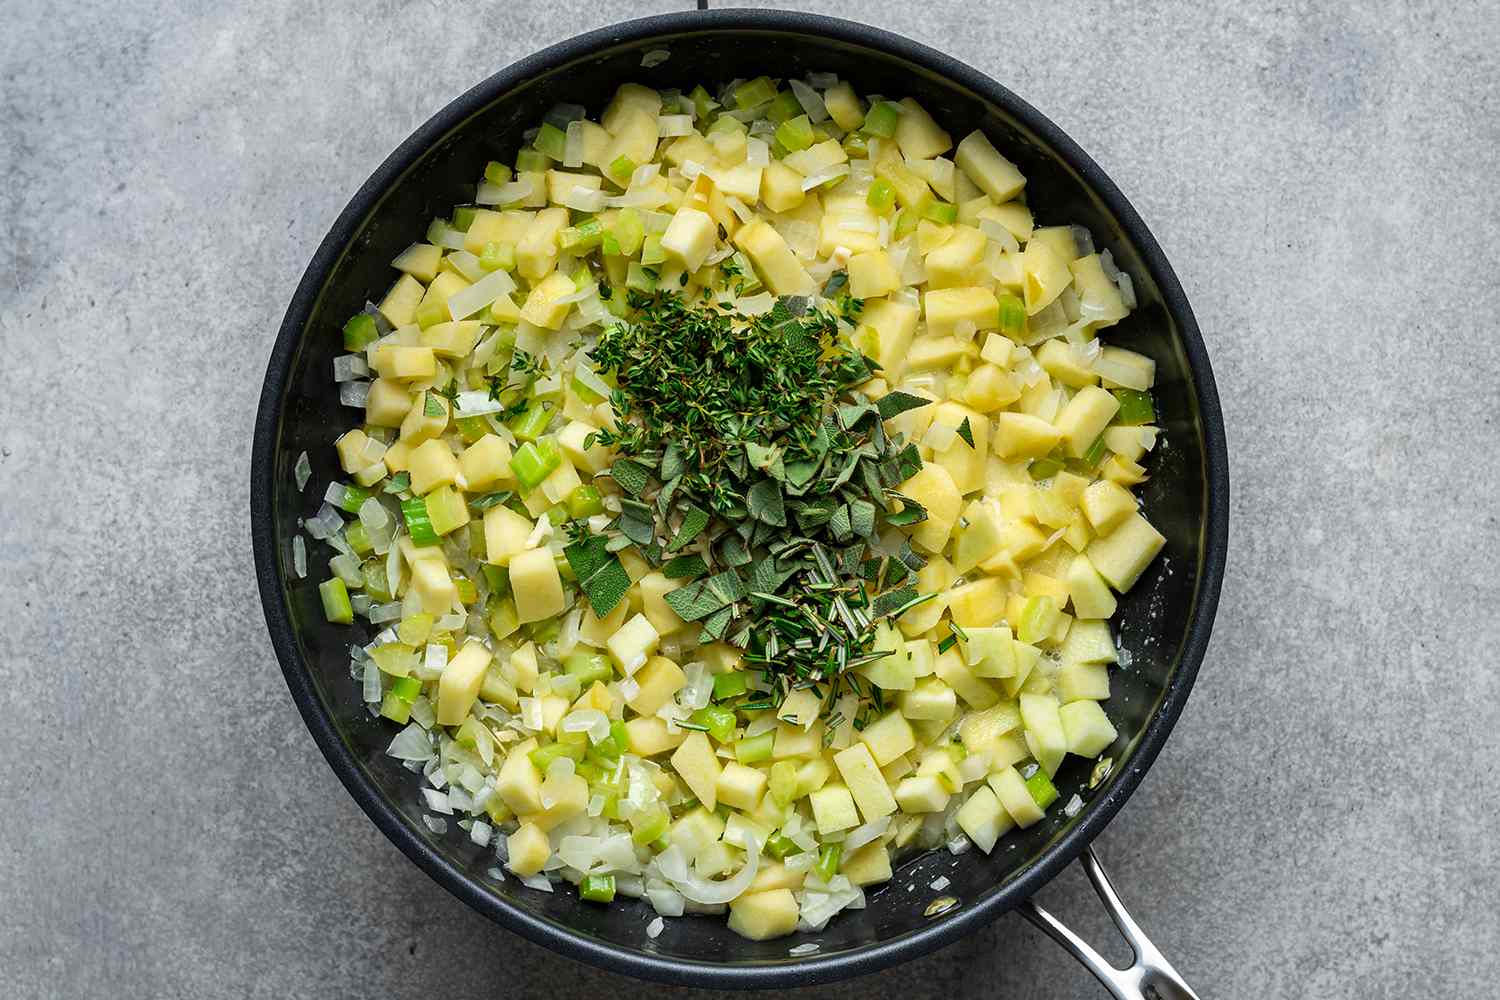 cooked chopped onions, celery and apples with herbs in a skillet